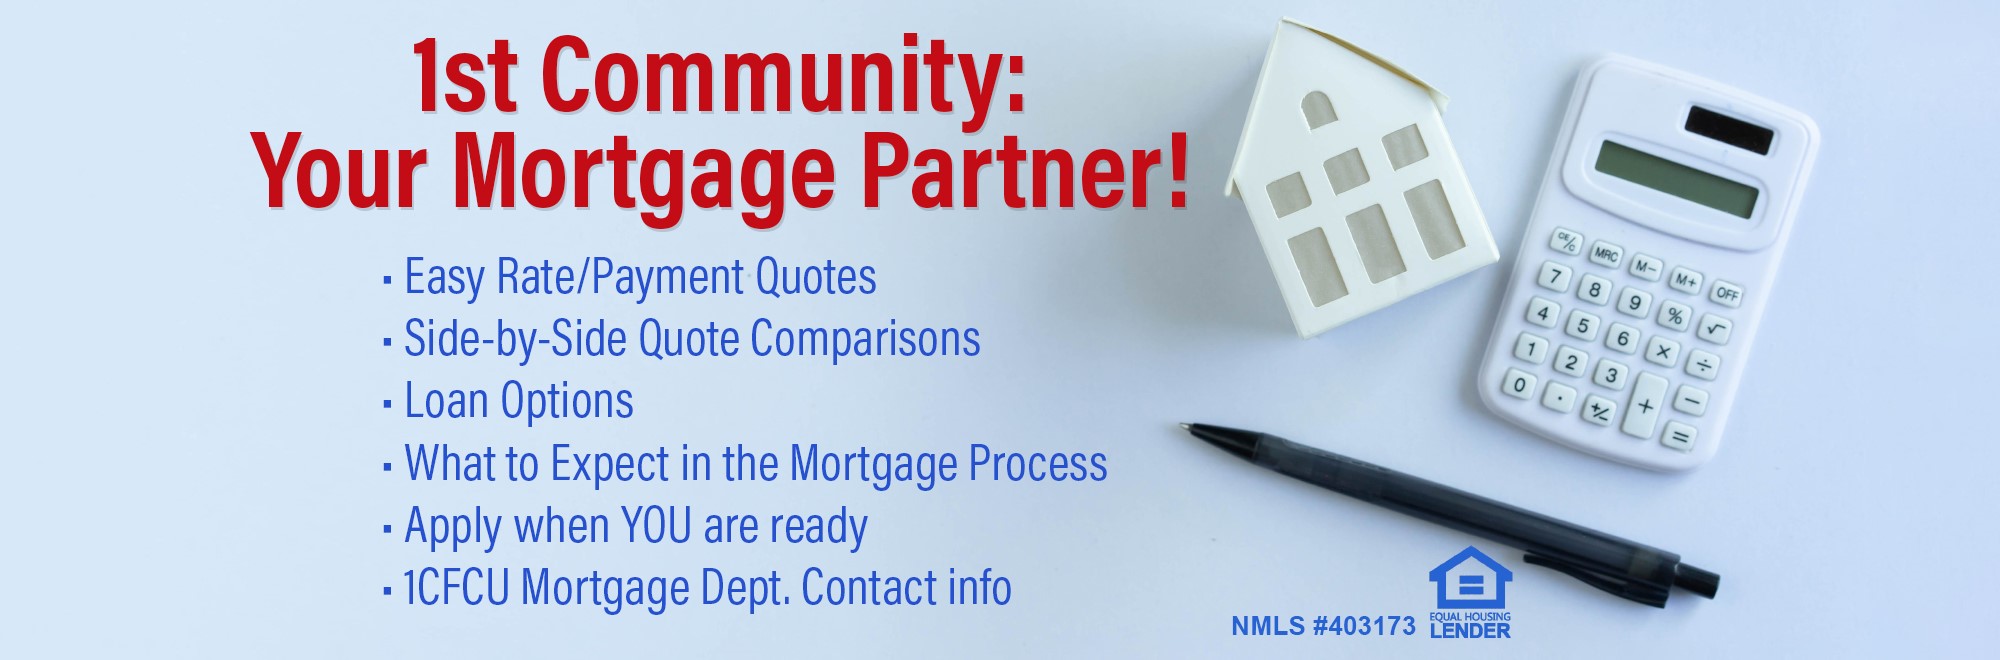 1st Community is your mortgage partner with easy rate side by side quote comparisons. Learn what your options are and what to expect in the mortgage process. Get our Mortgage department contact info and apply when you’re ready